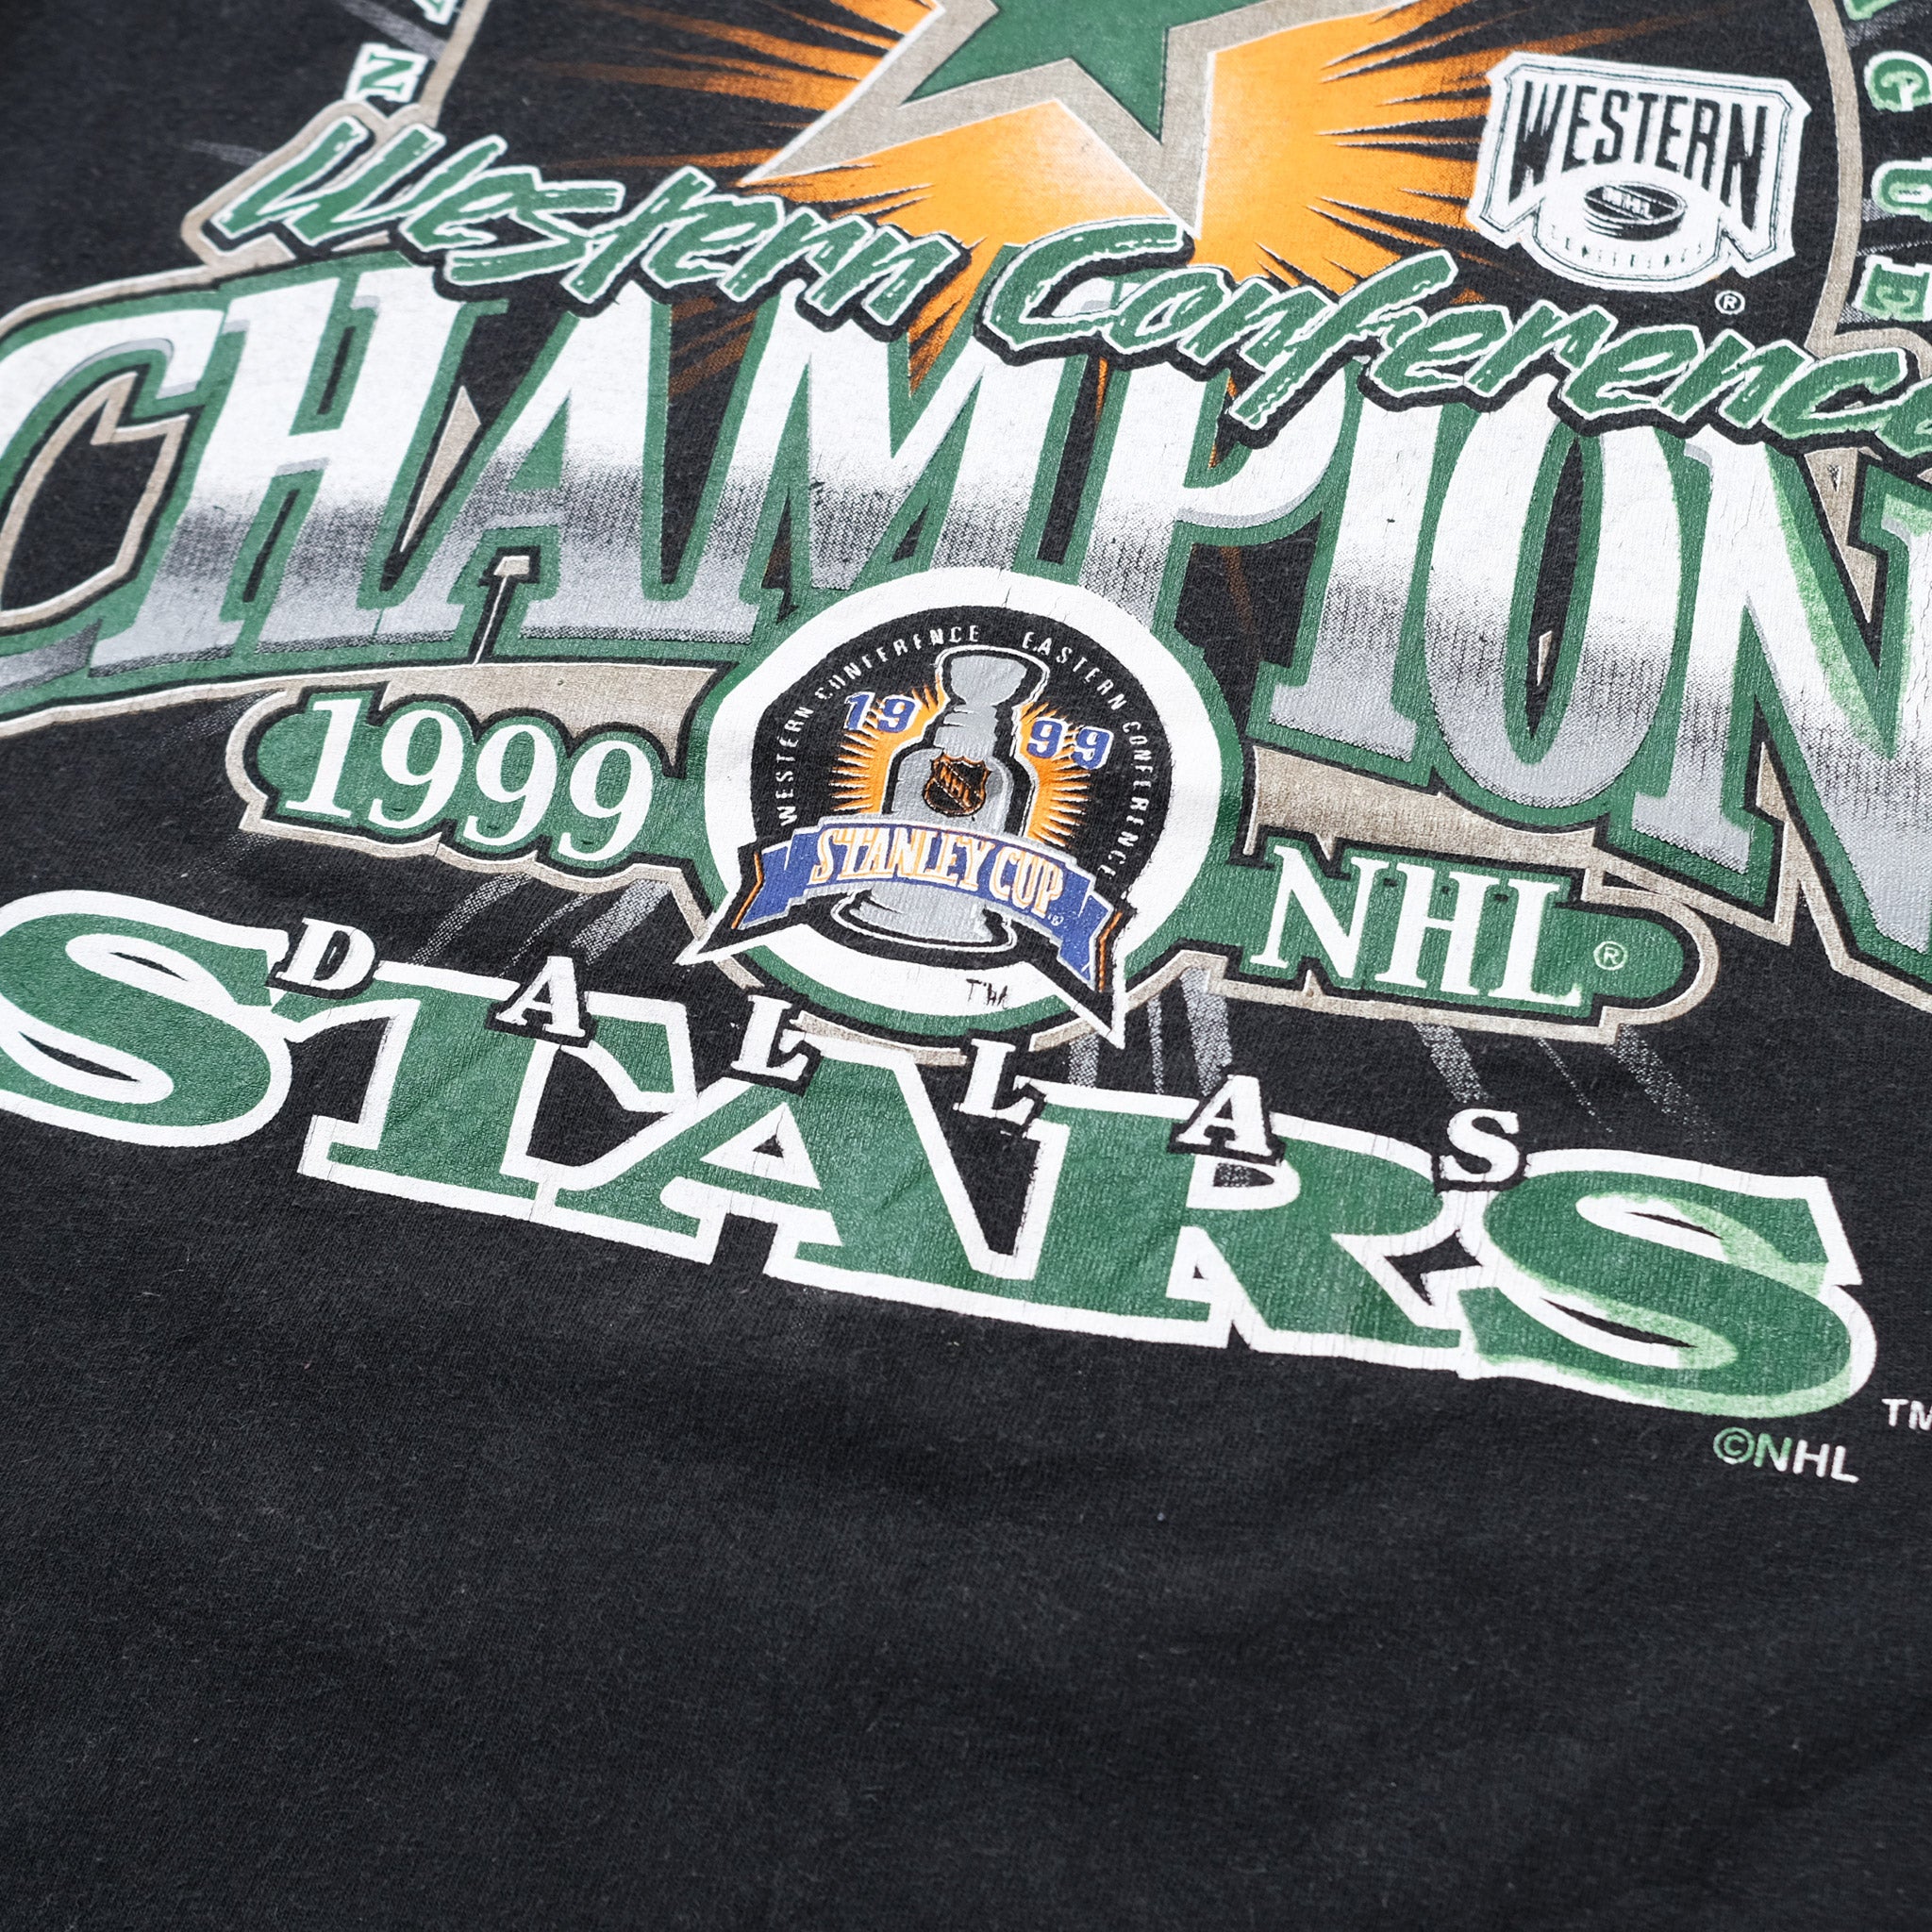 Congrats Dallas Stars Advanced To The Western Conference Final Stanley Cup  Classic T-Shirt - Mugteeco